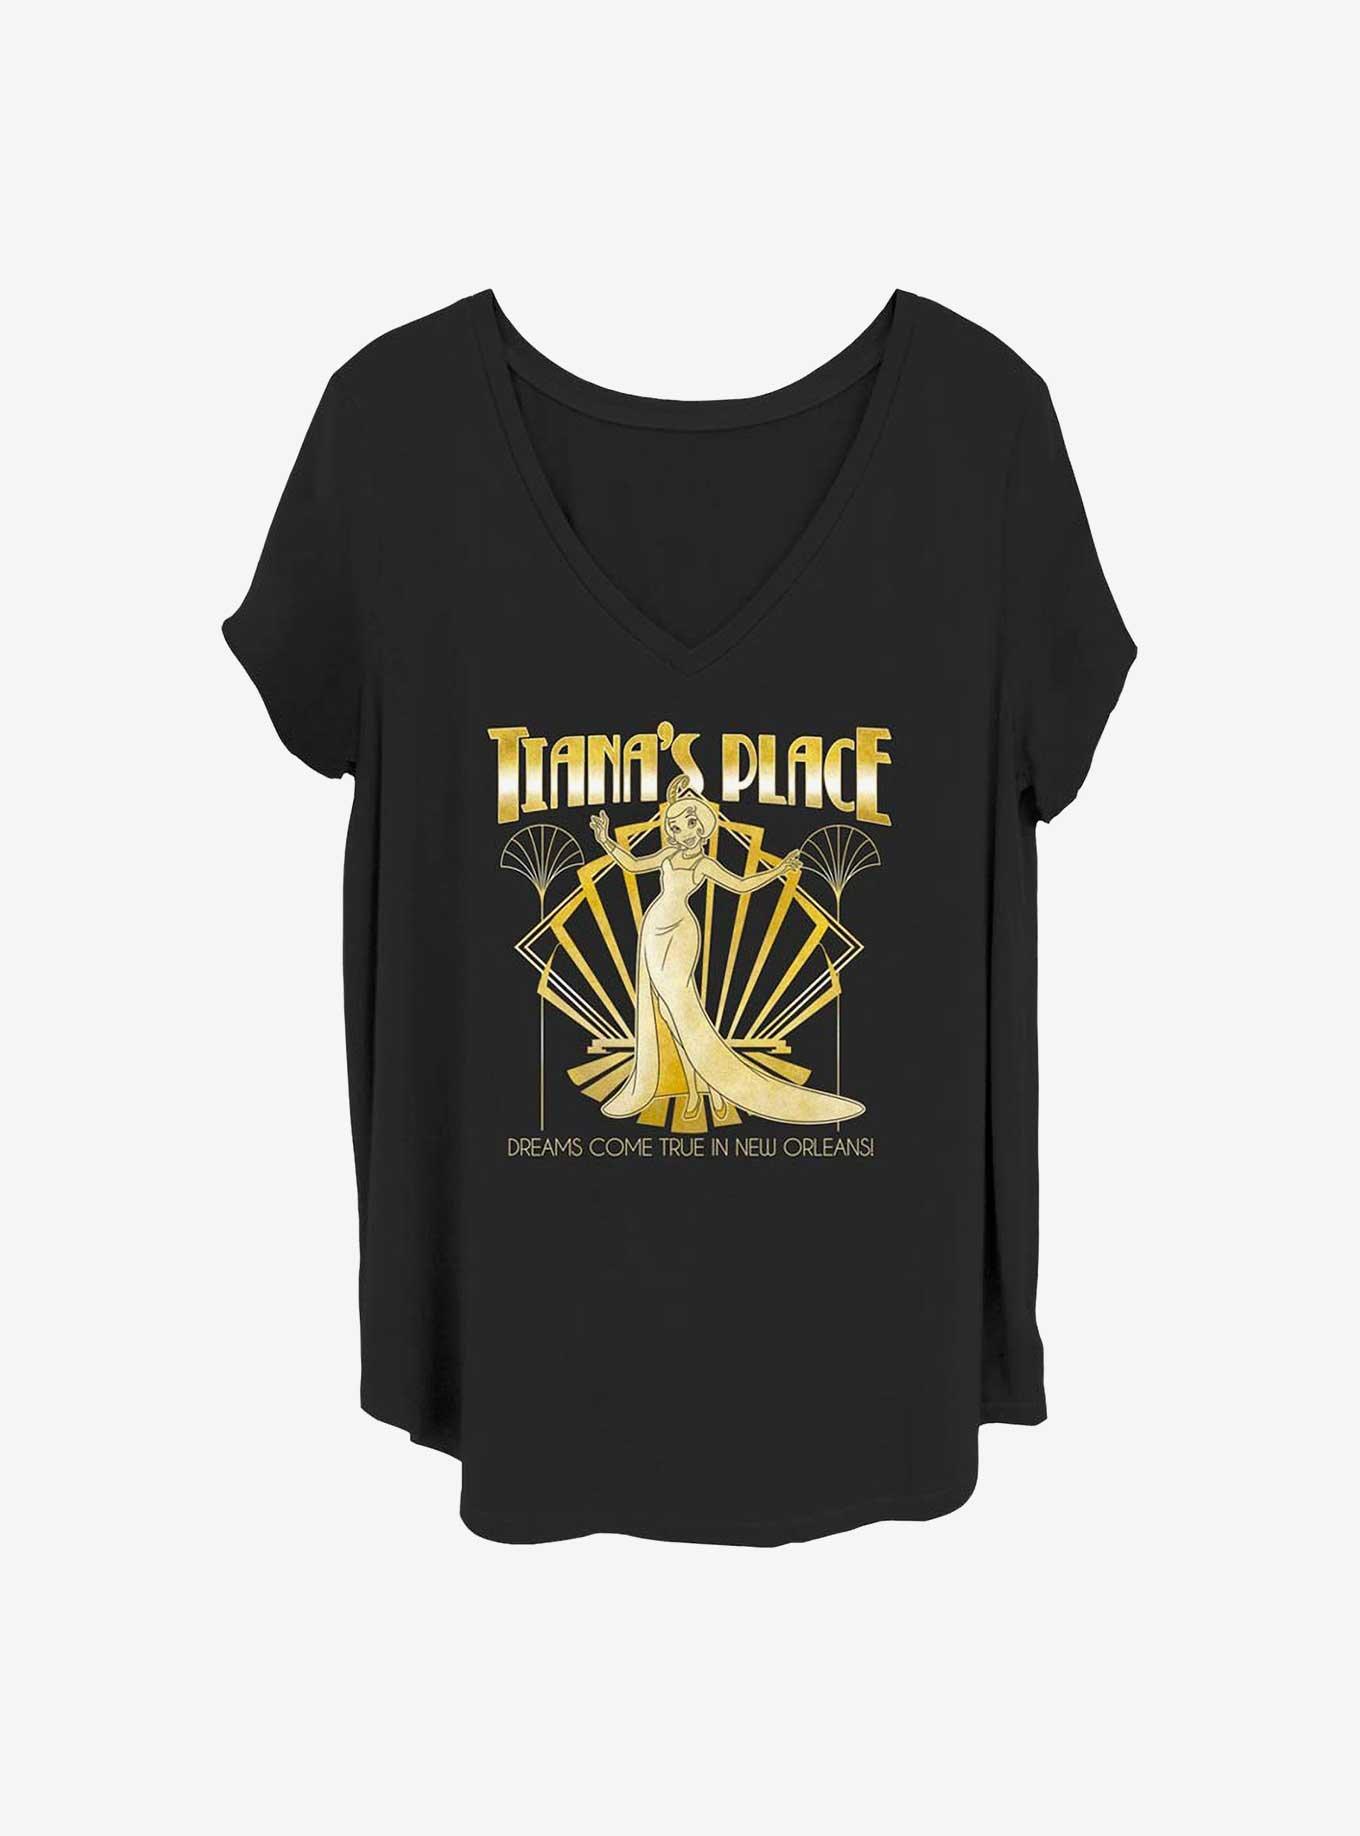 Disney the Princess and Frog Tiana's Place New Orleans Girls T-Shirt Plus